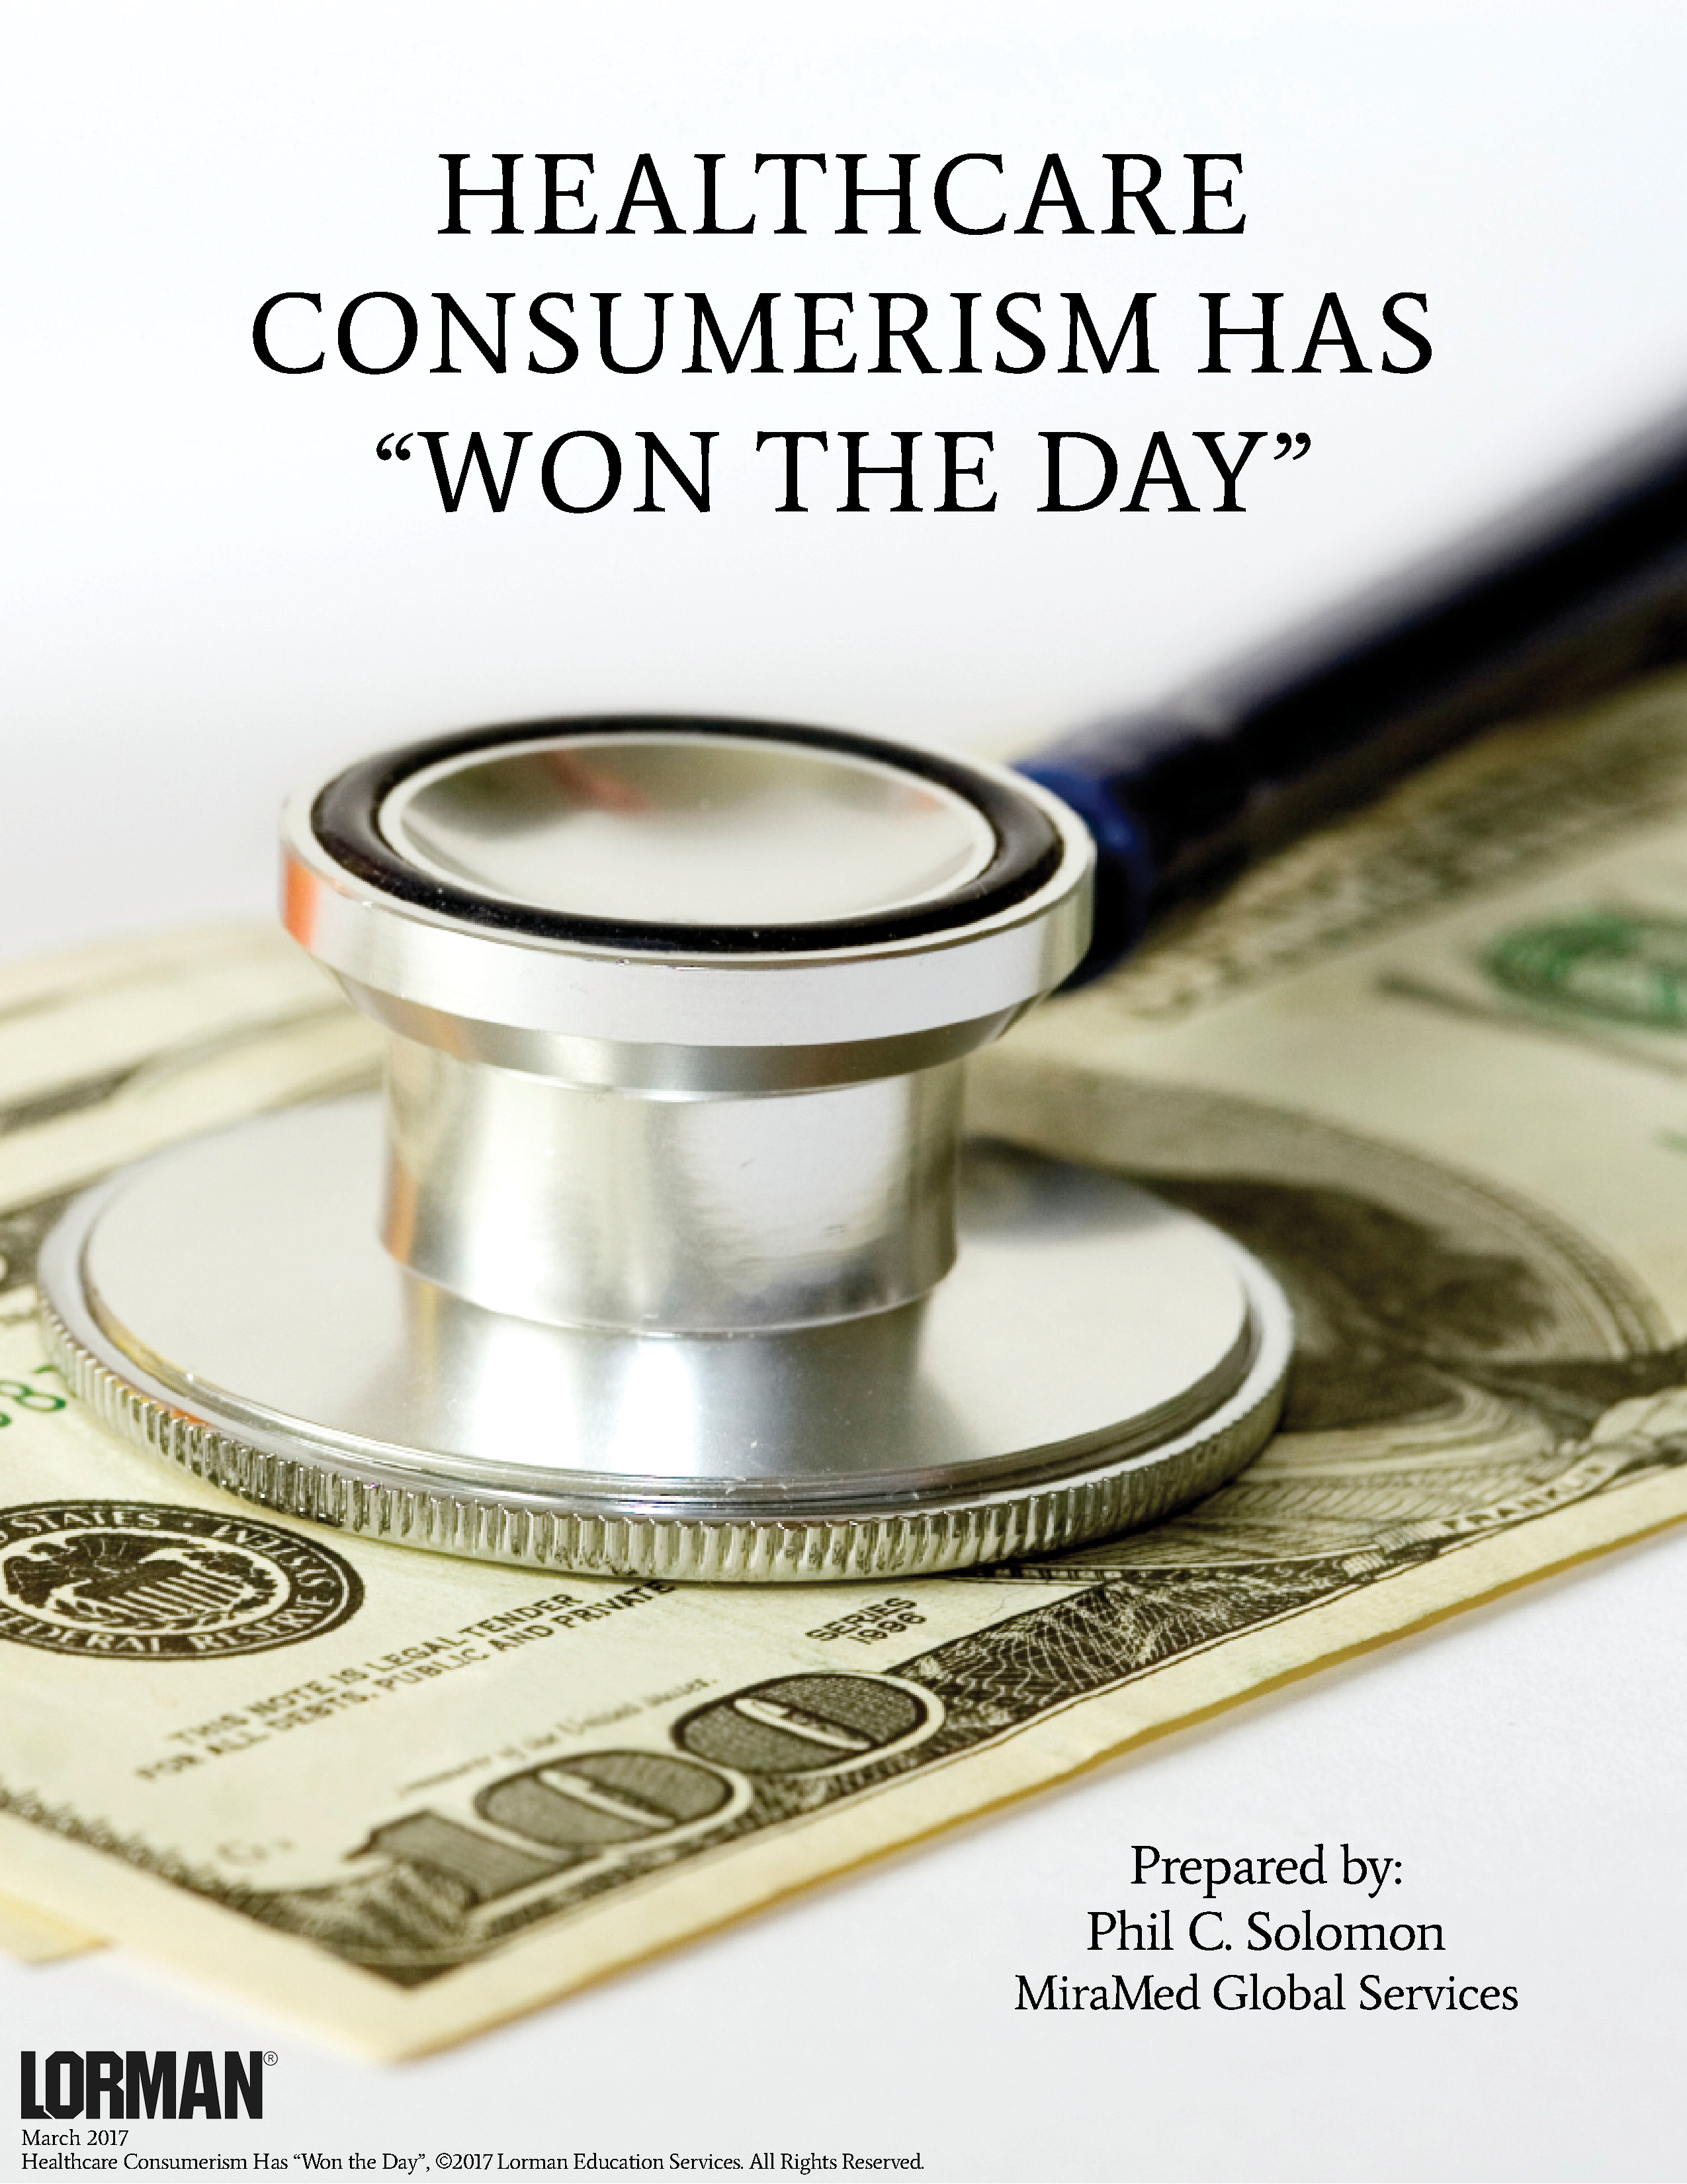 Healthcare Consumerism Has “Won the Day”